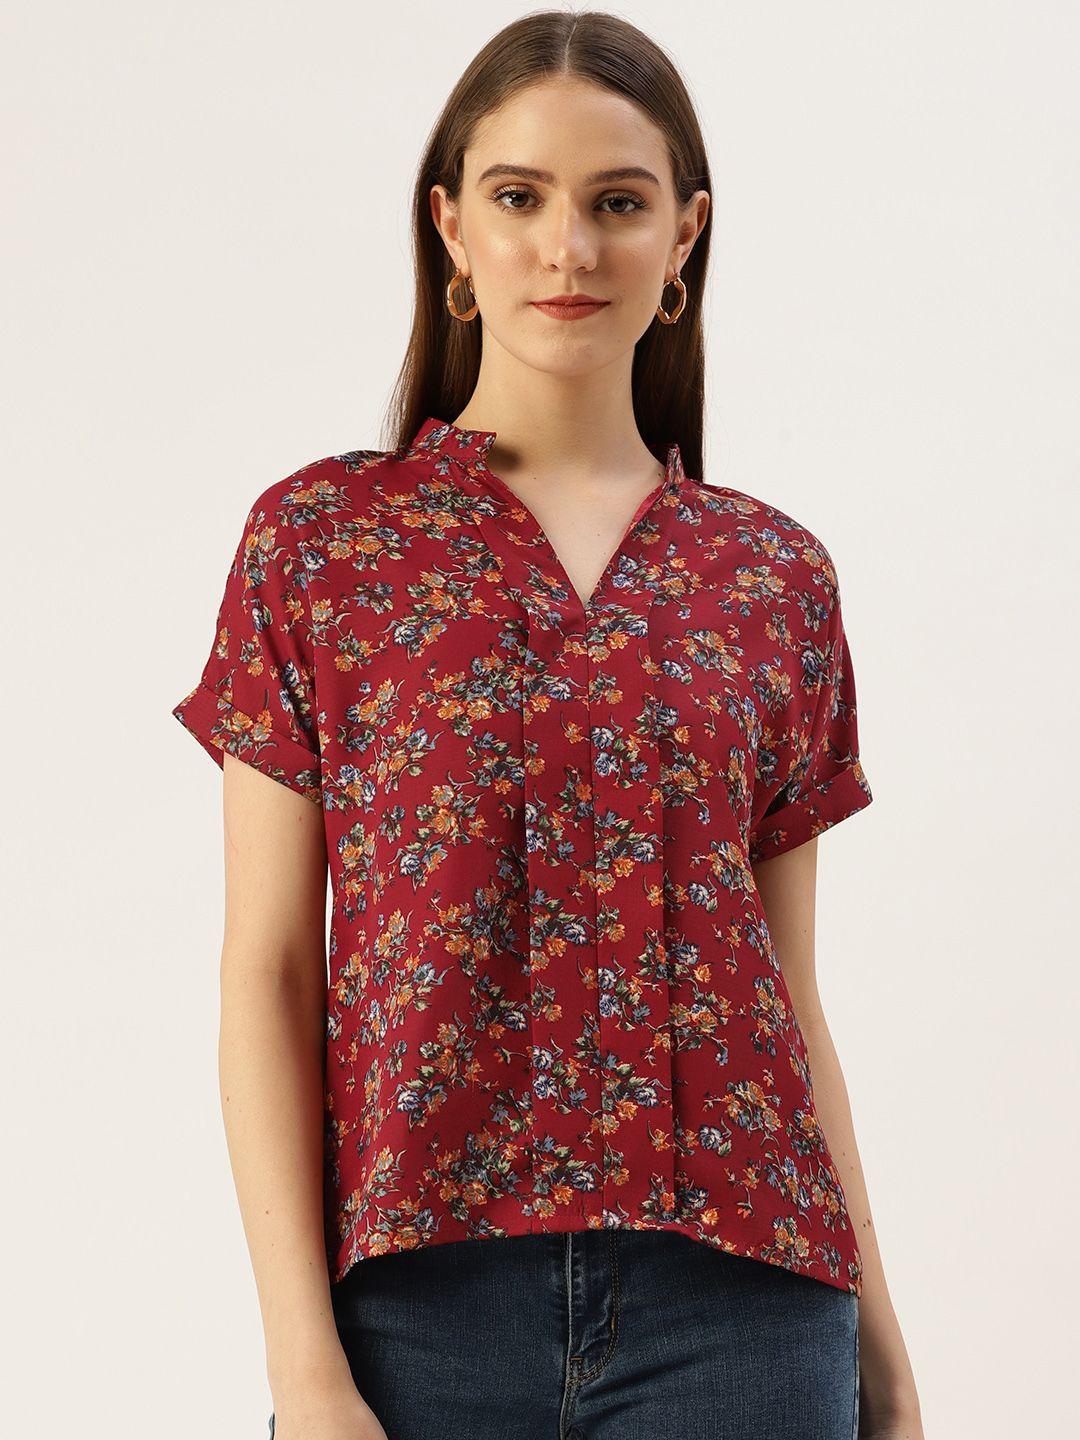 off-label-red-floral-print-top